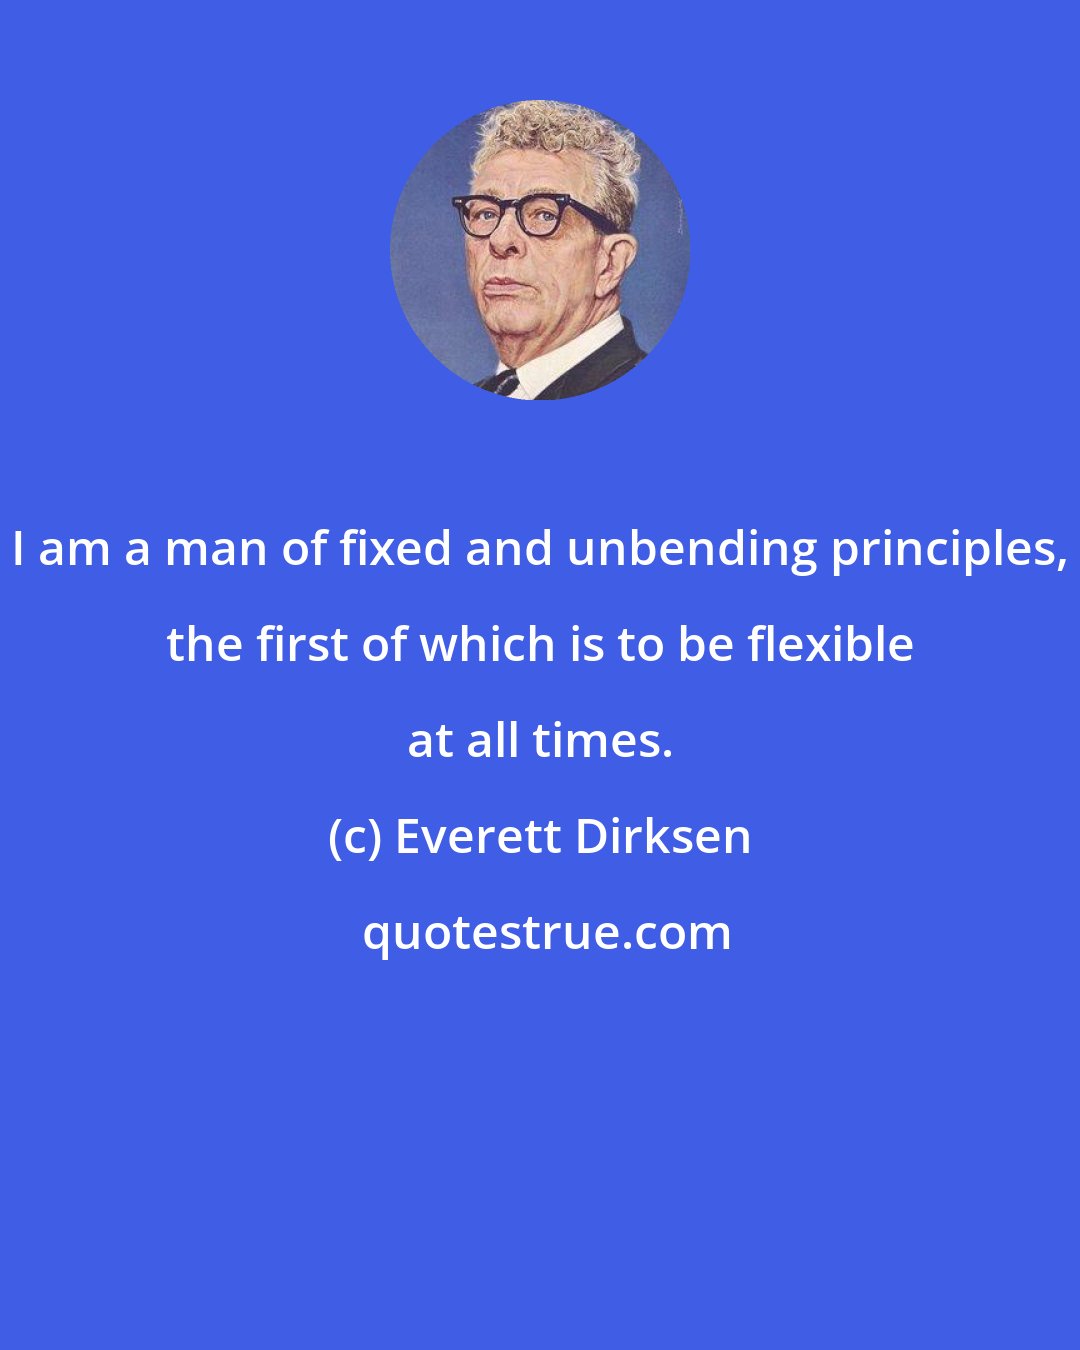 Everett Dirksen: I am a man of fixed and unbending principles, the first of which is to be flexible at all times.